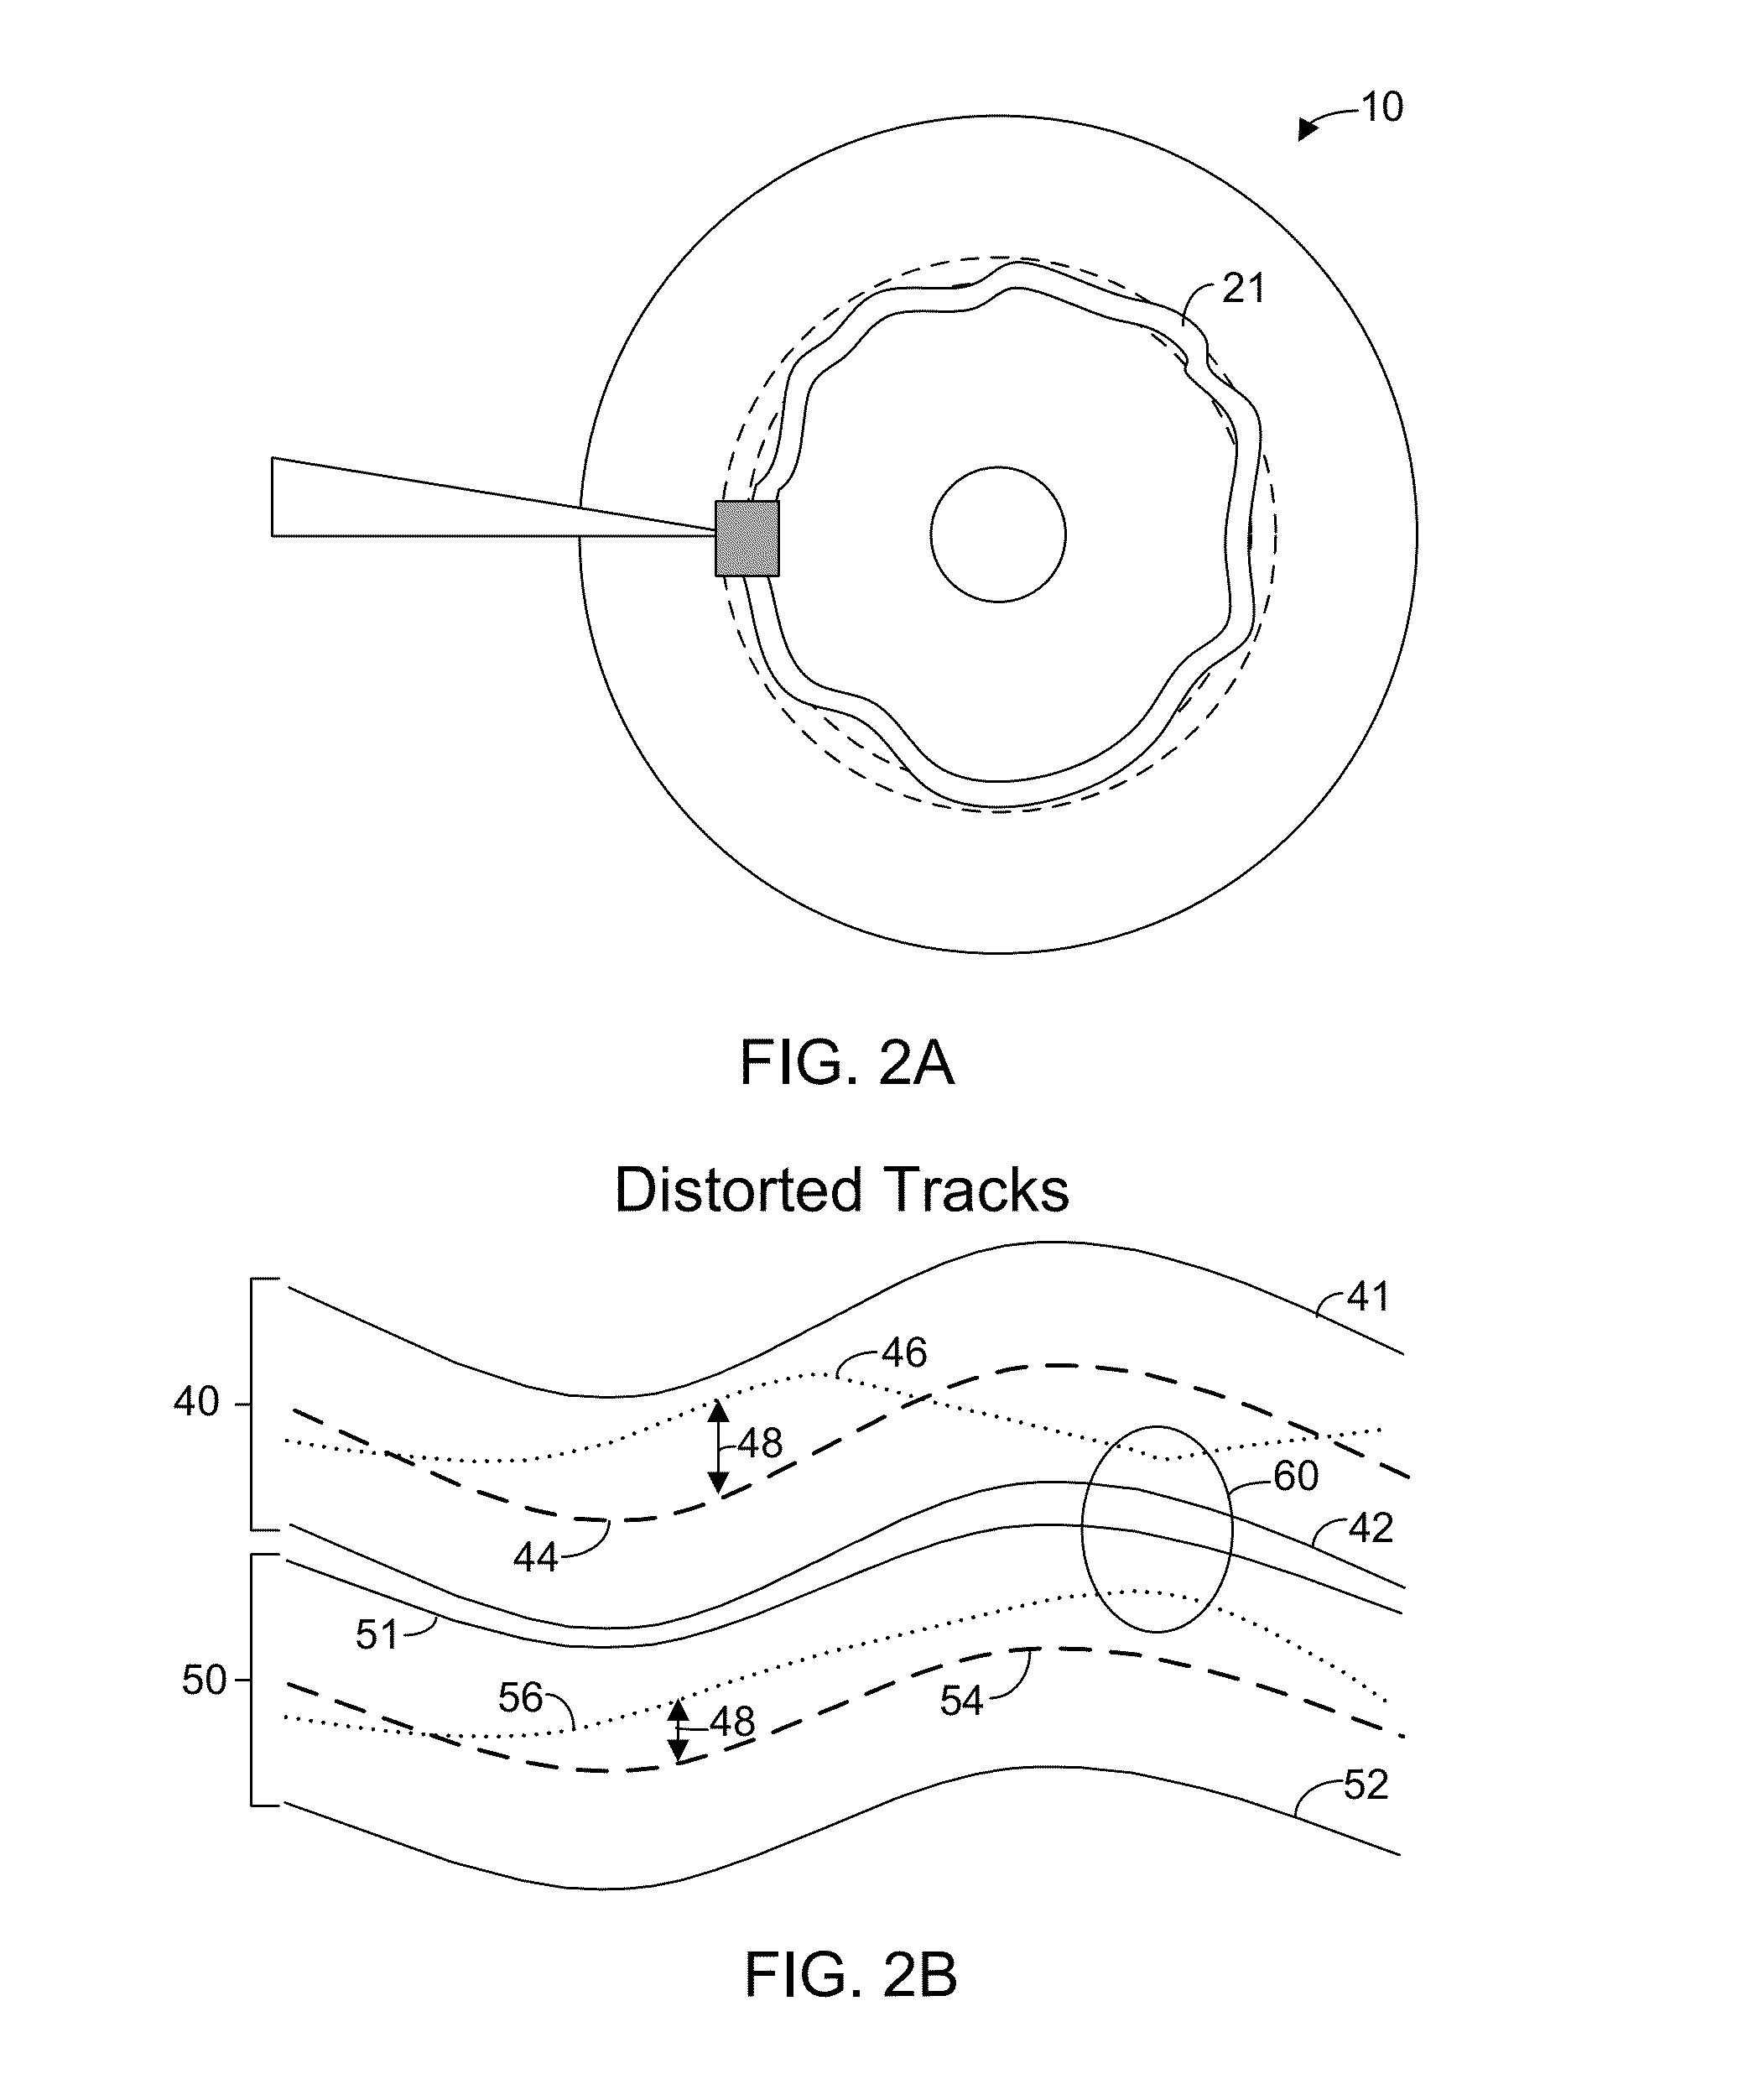 Method of compensating for repeatable runout error